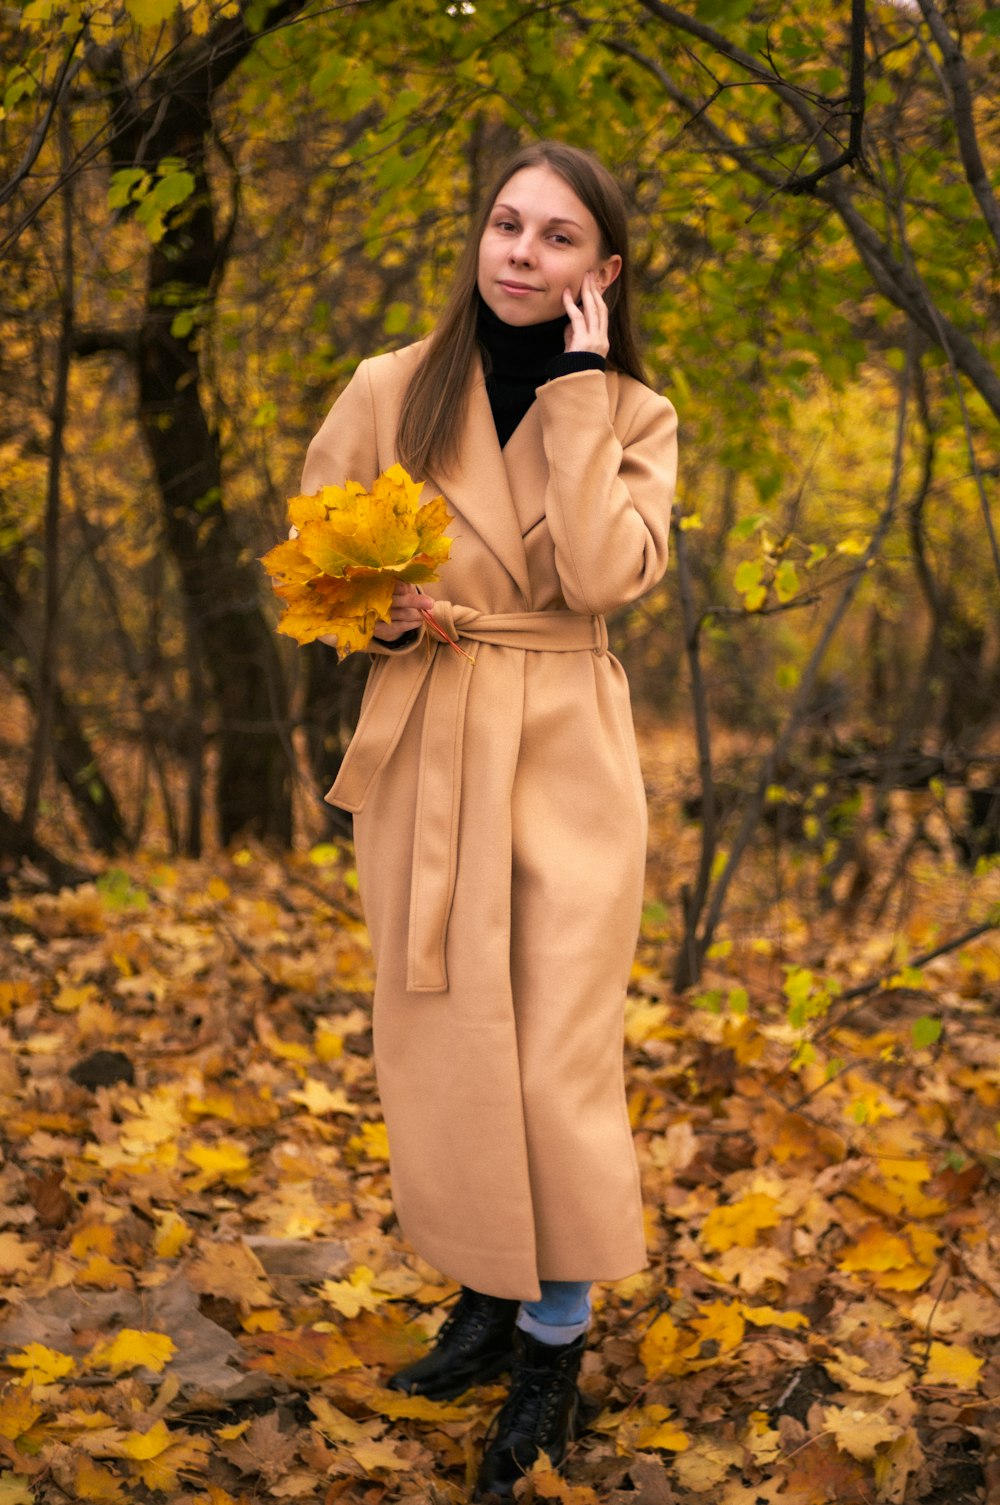 a person in a dress holding a yellow flower in a forest